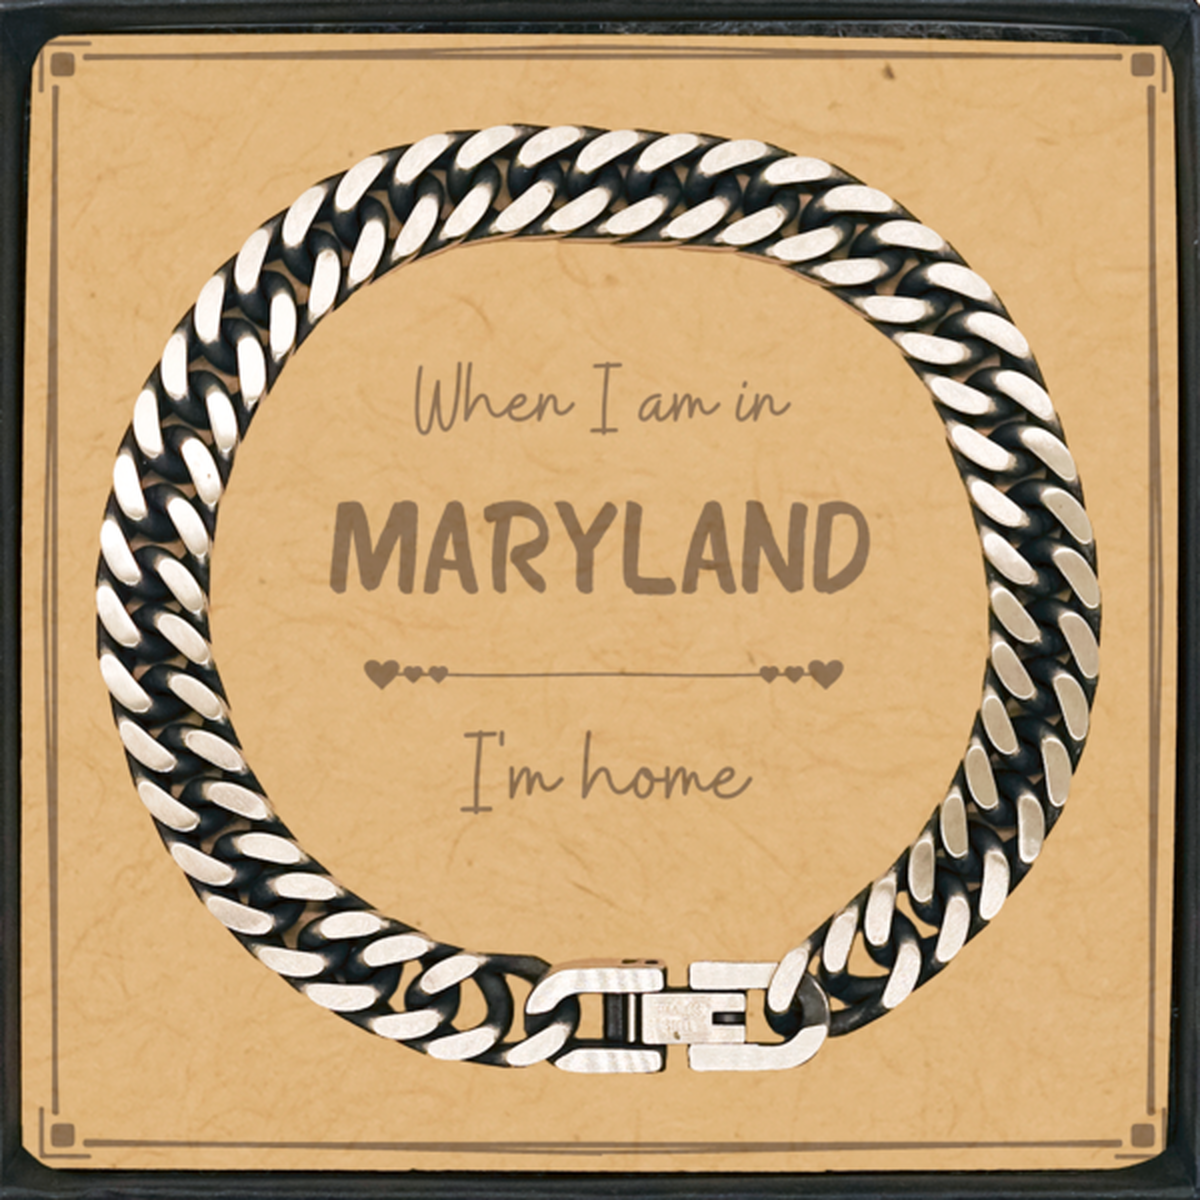 When I am in Maryland I'm home Cuban Link Chain Bracelet, Message Card Gifts For Maryland, State Maryland Birthday Gifts for Friends Coworker